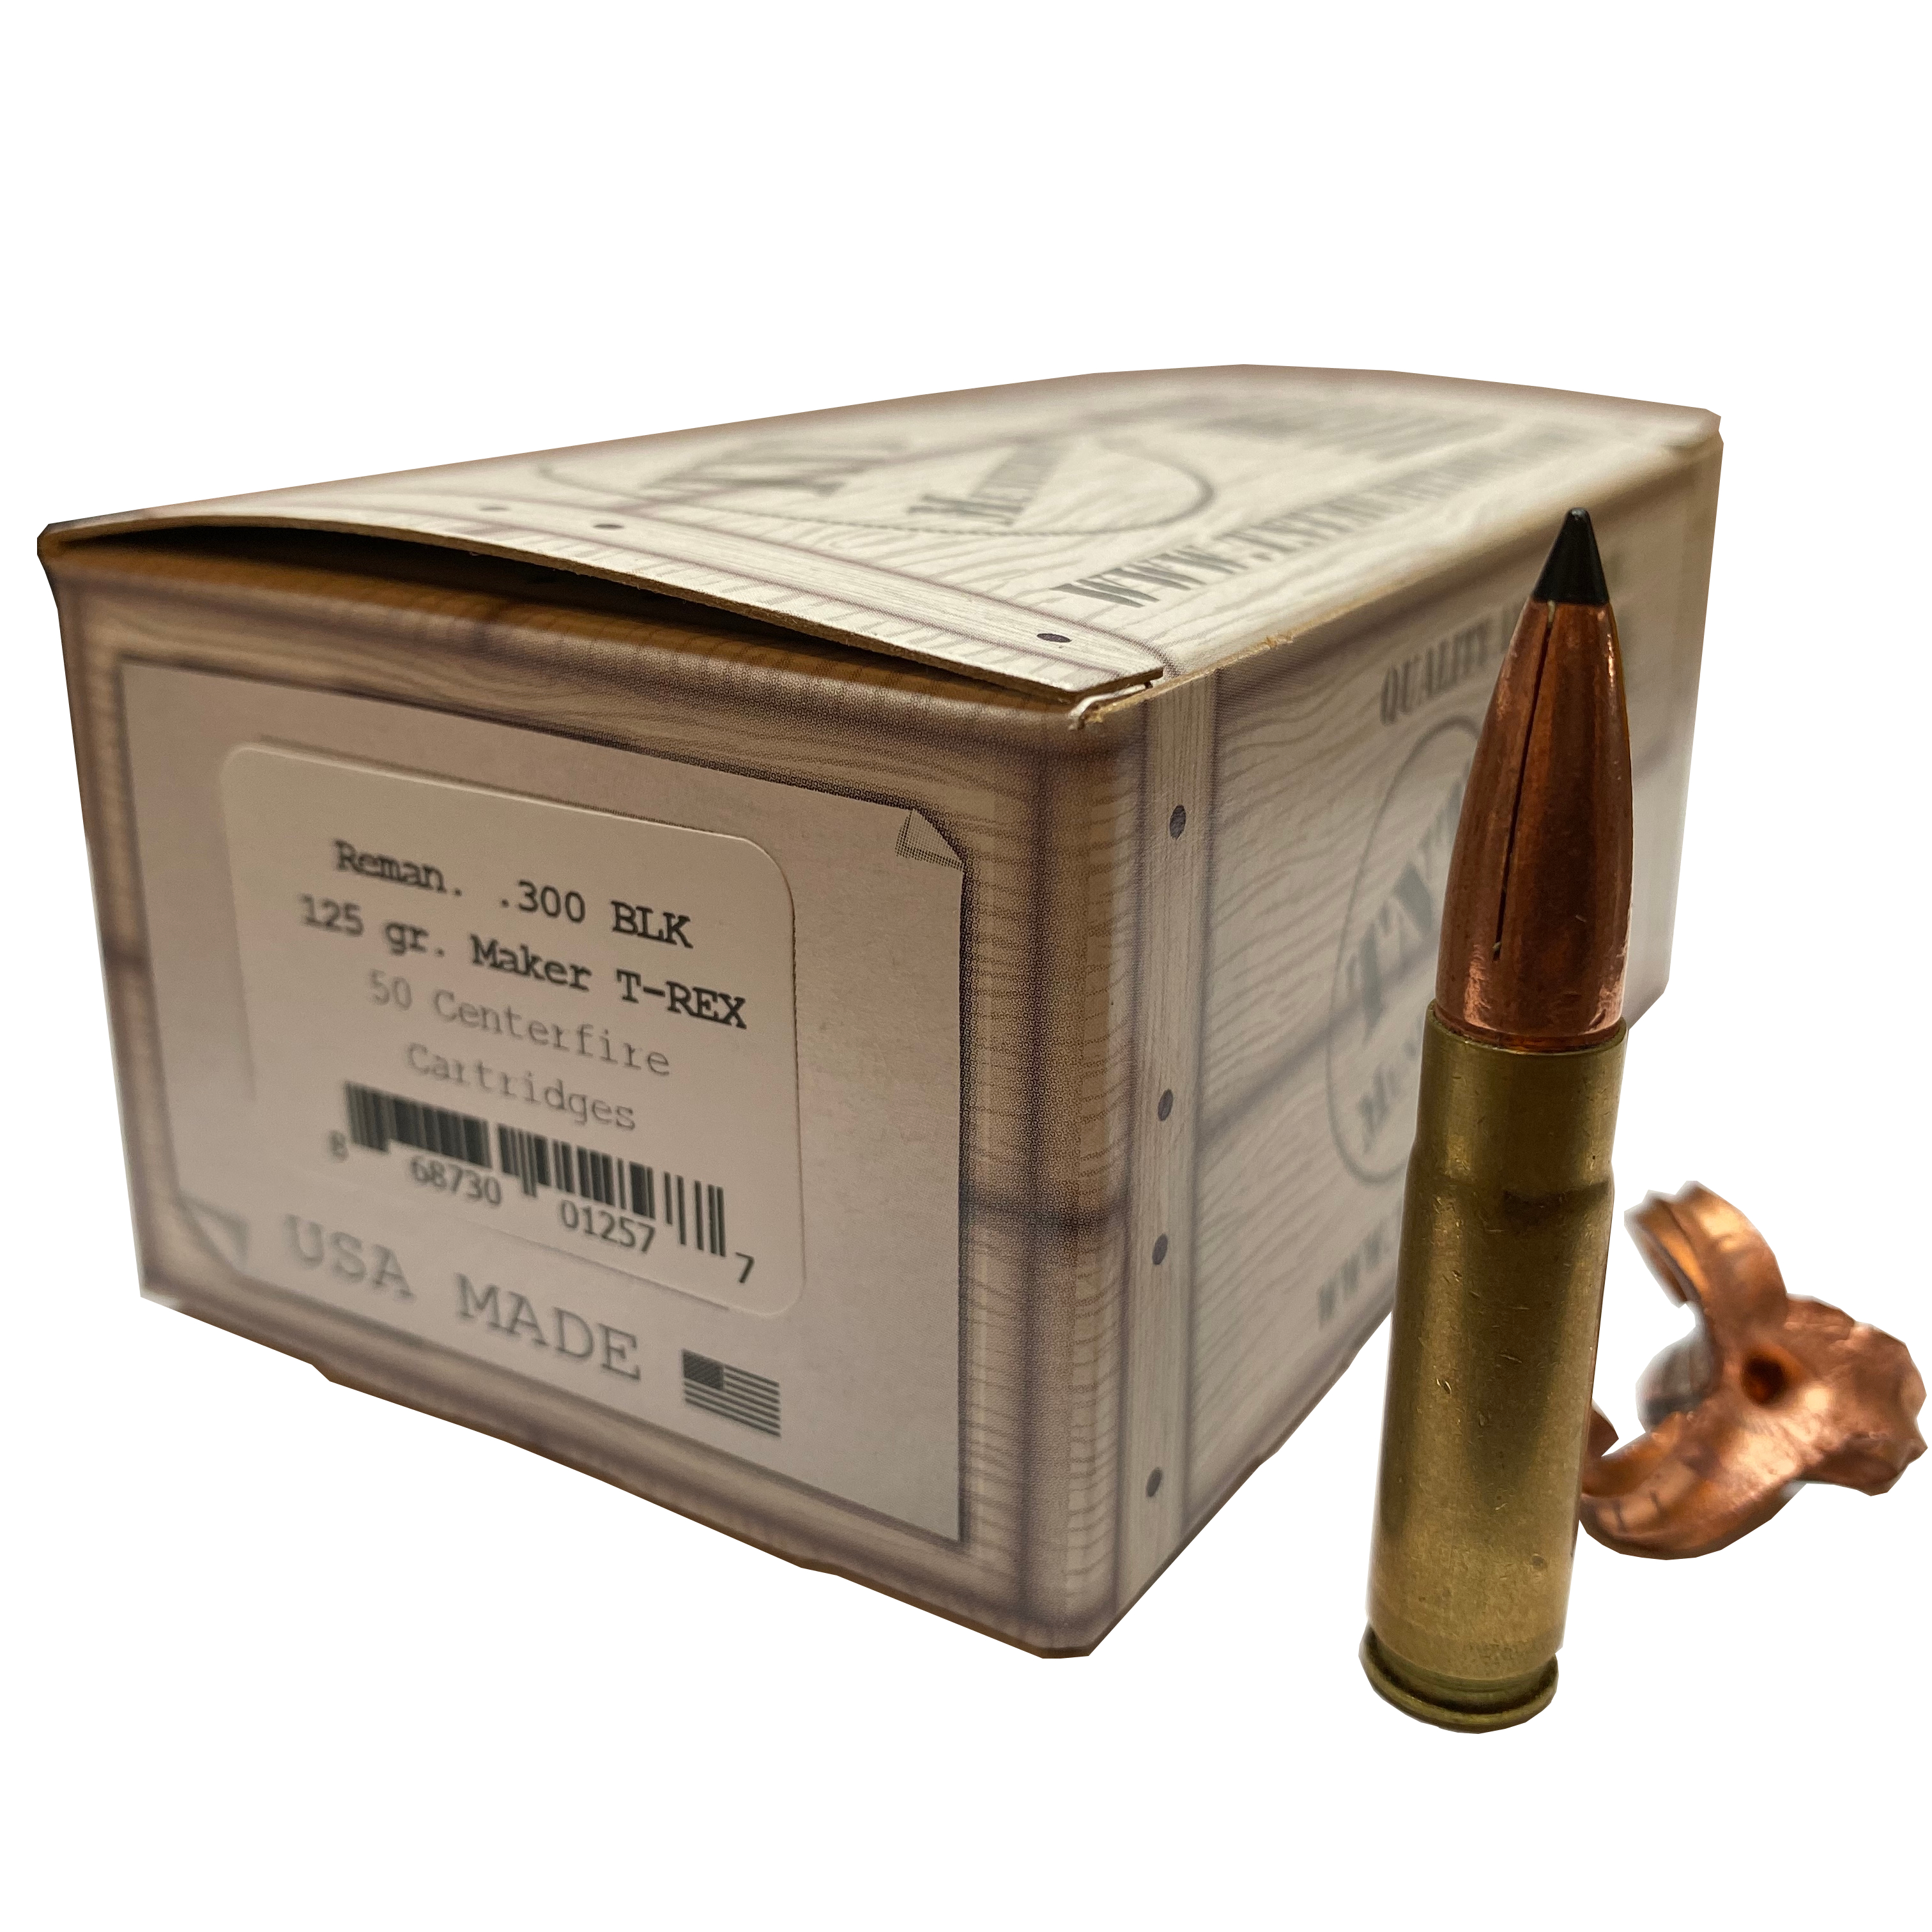 .300  AAC Blackout 125 gr. Maker T-REX. MEMORIAL DAY SALE! THROUGH MAY 29TH ONLY - SHIPS NBD  - (LEAD-FREE)